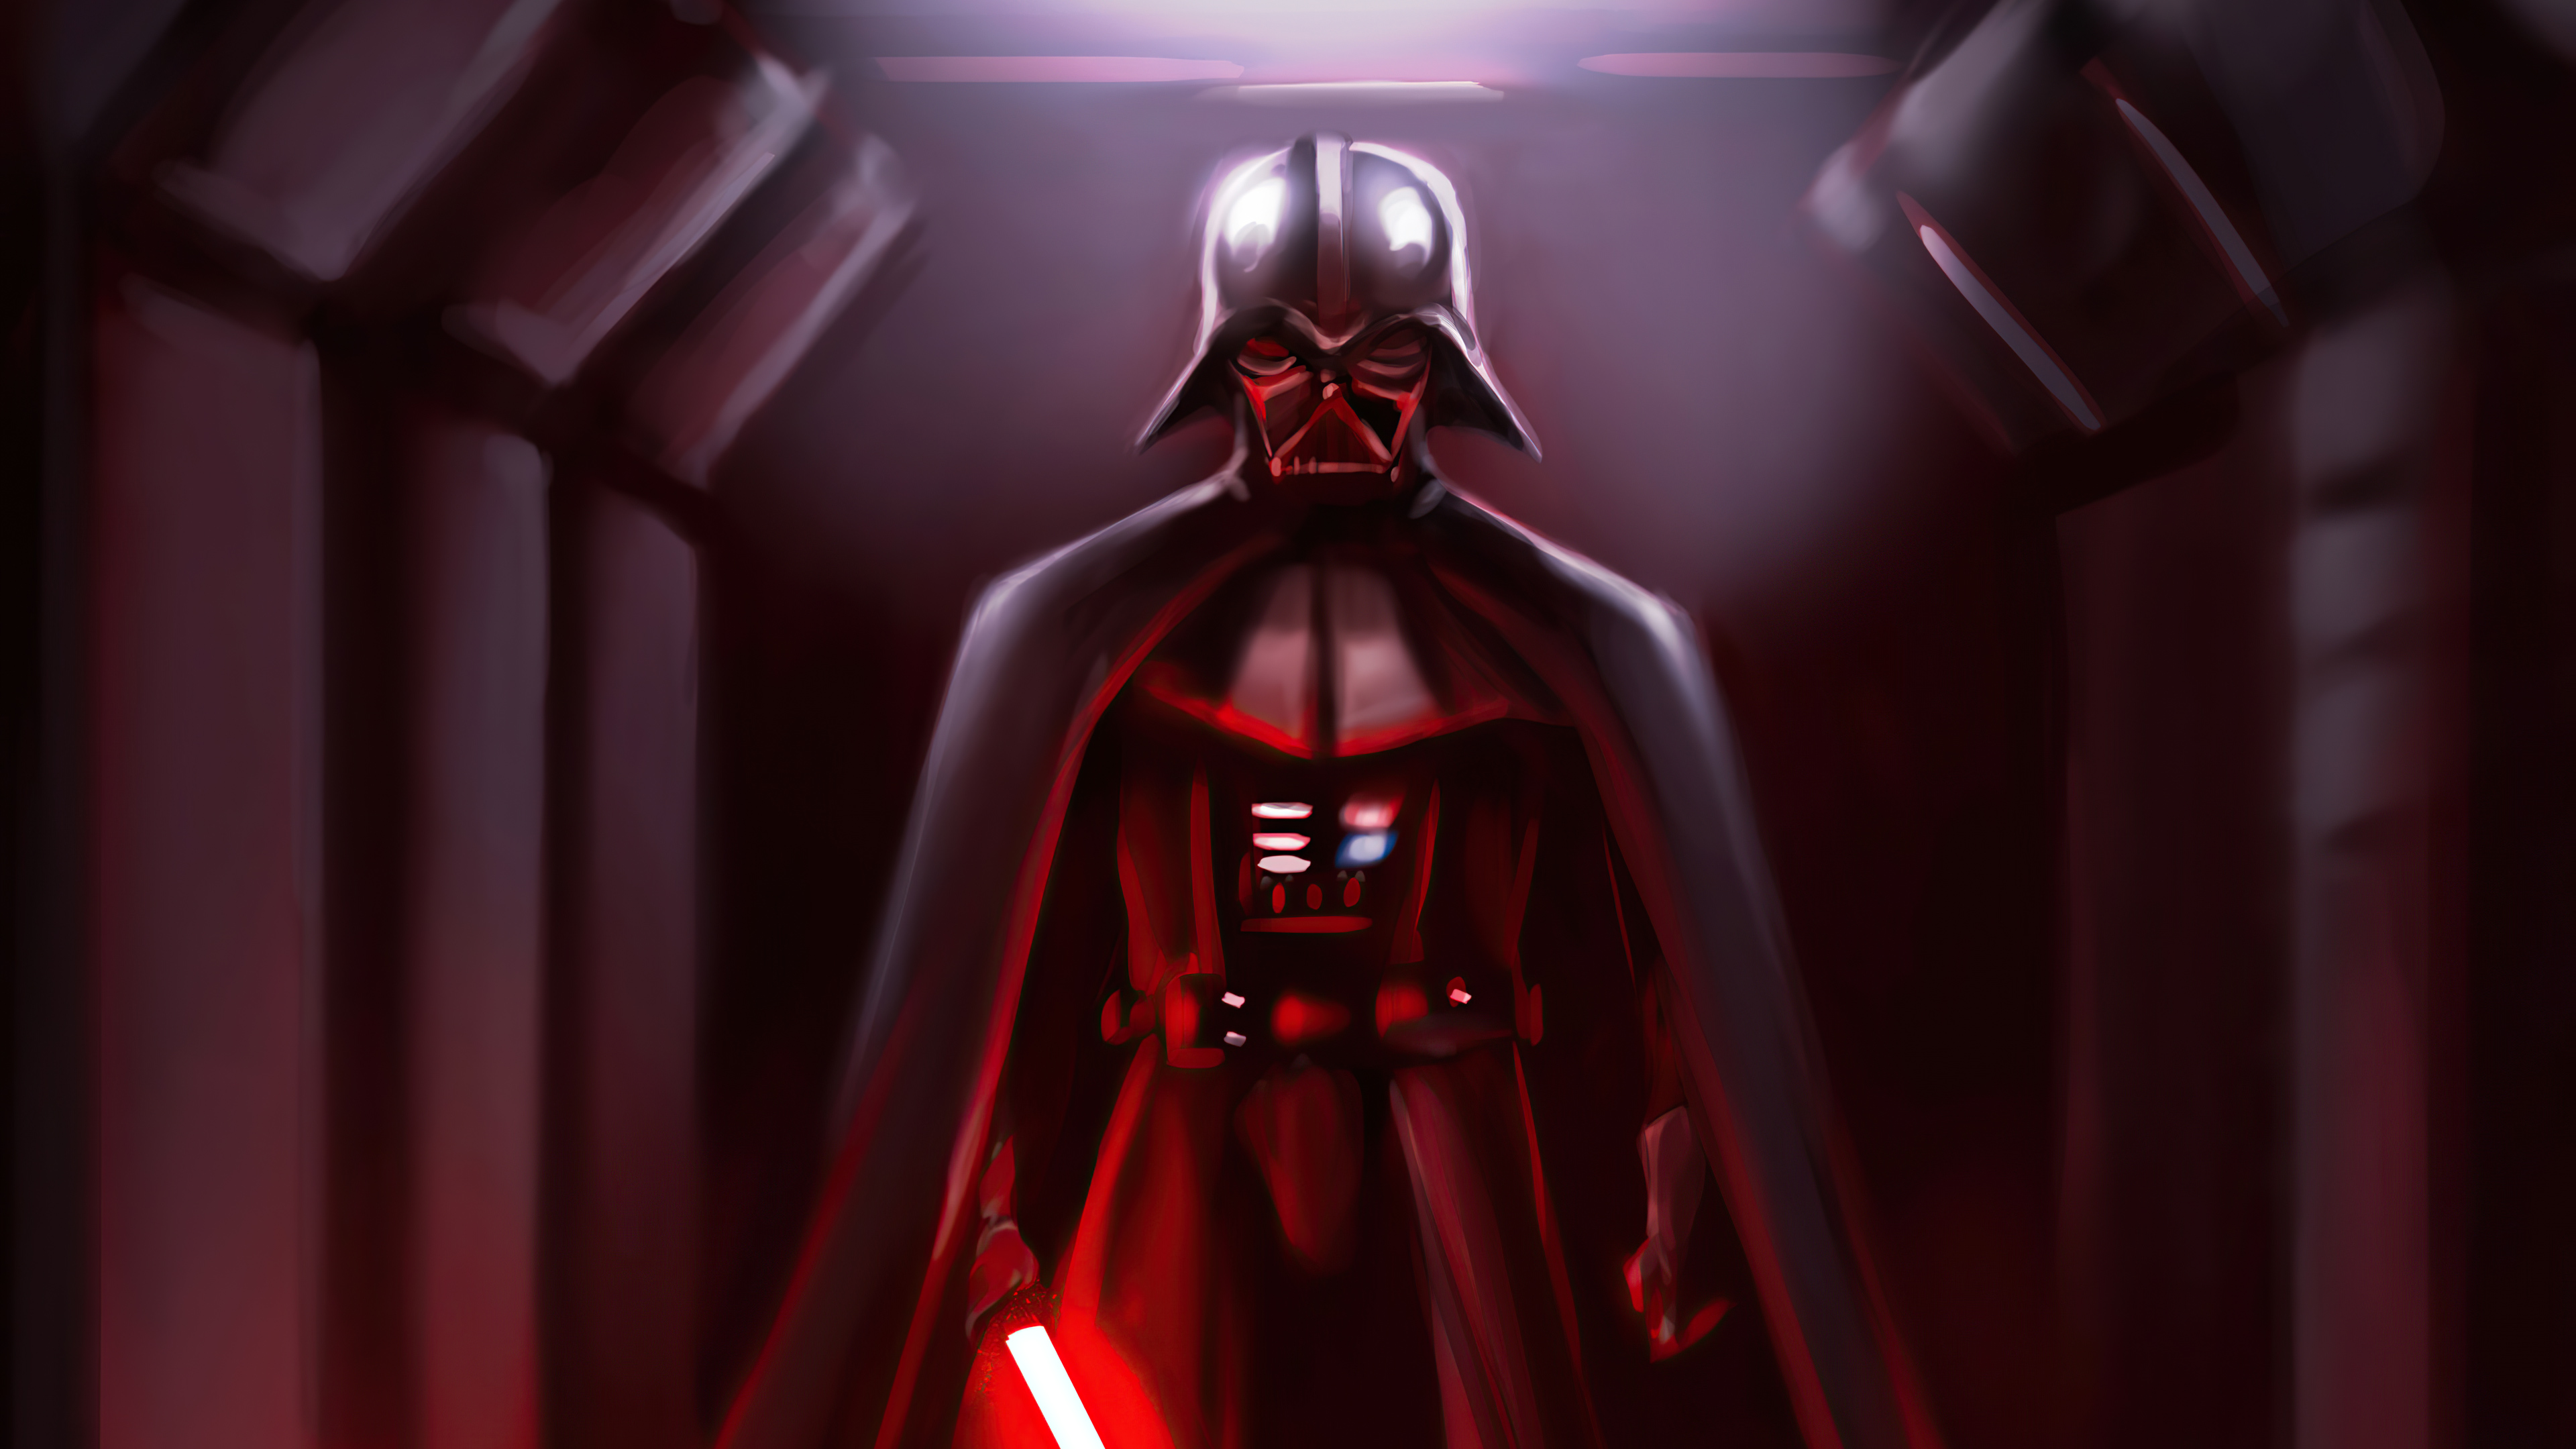 Download mobile wallpaper Star Wars, Sci Fi, Darth Vader, Sith (Star Wars) for free.